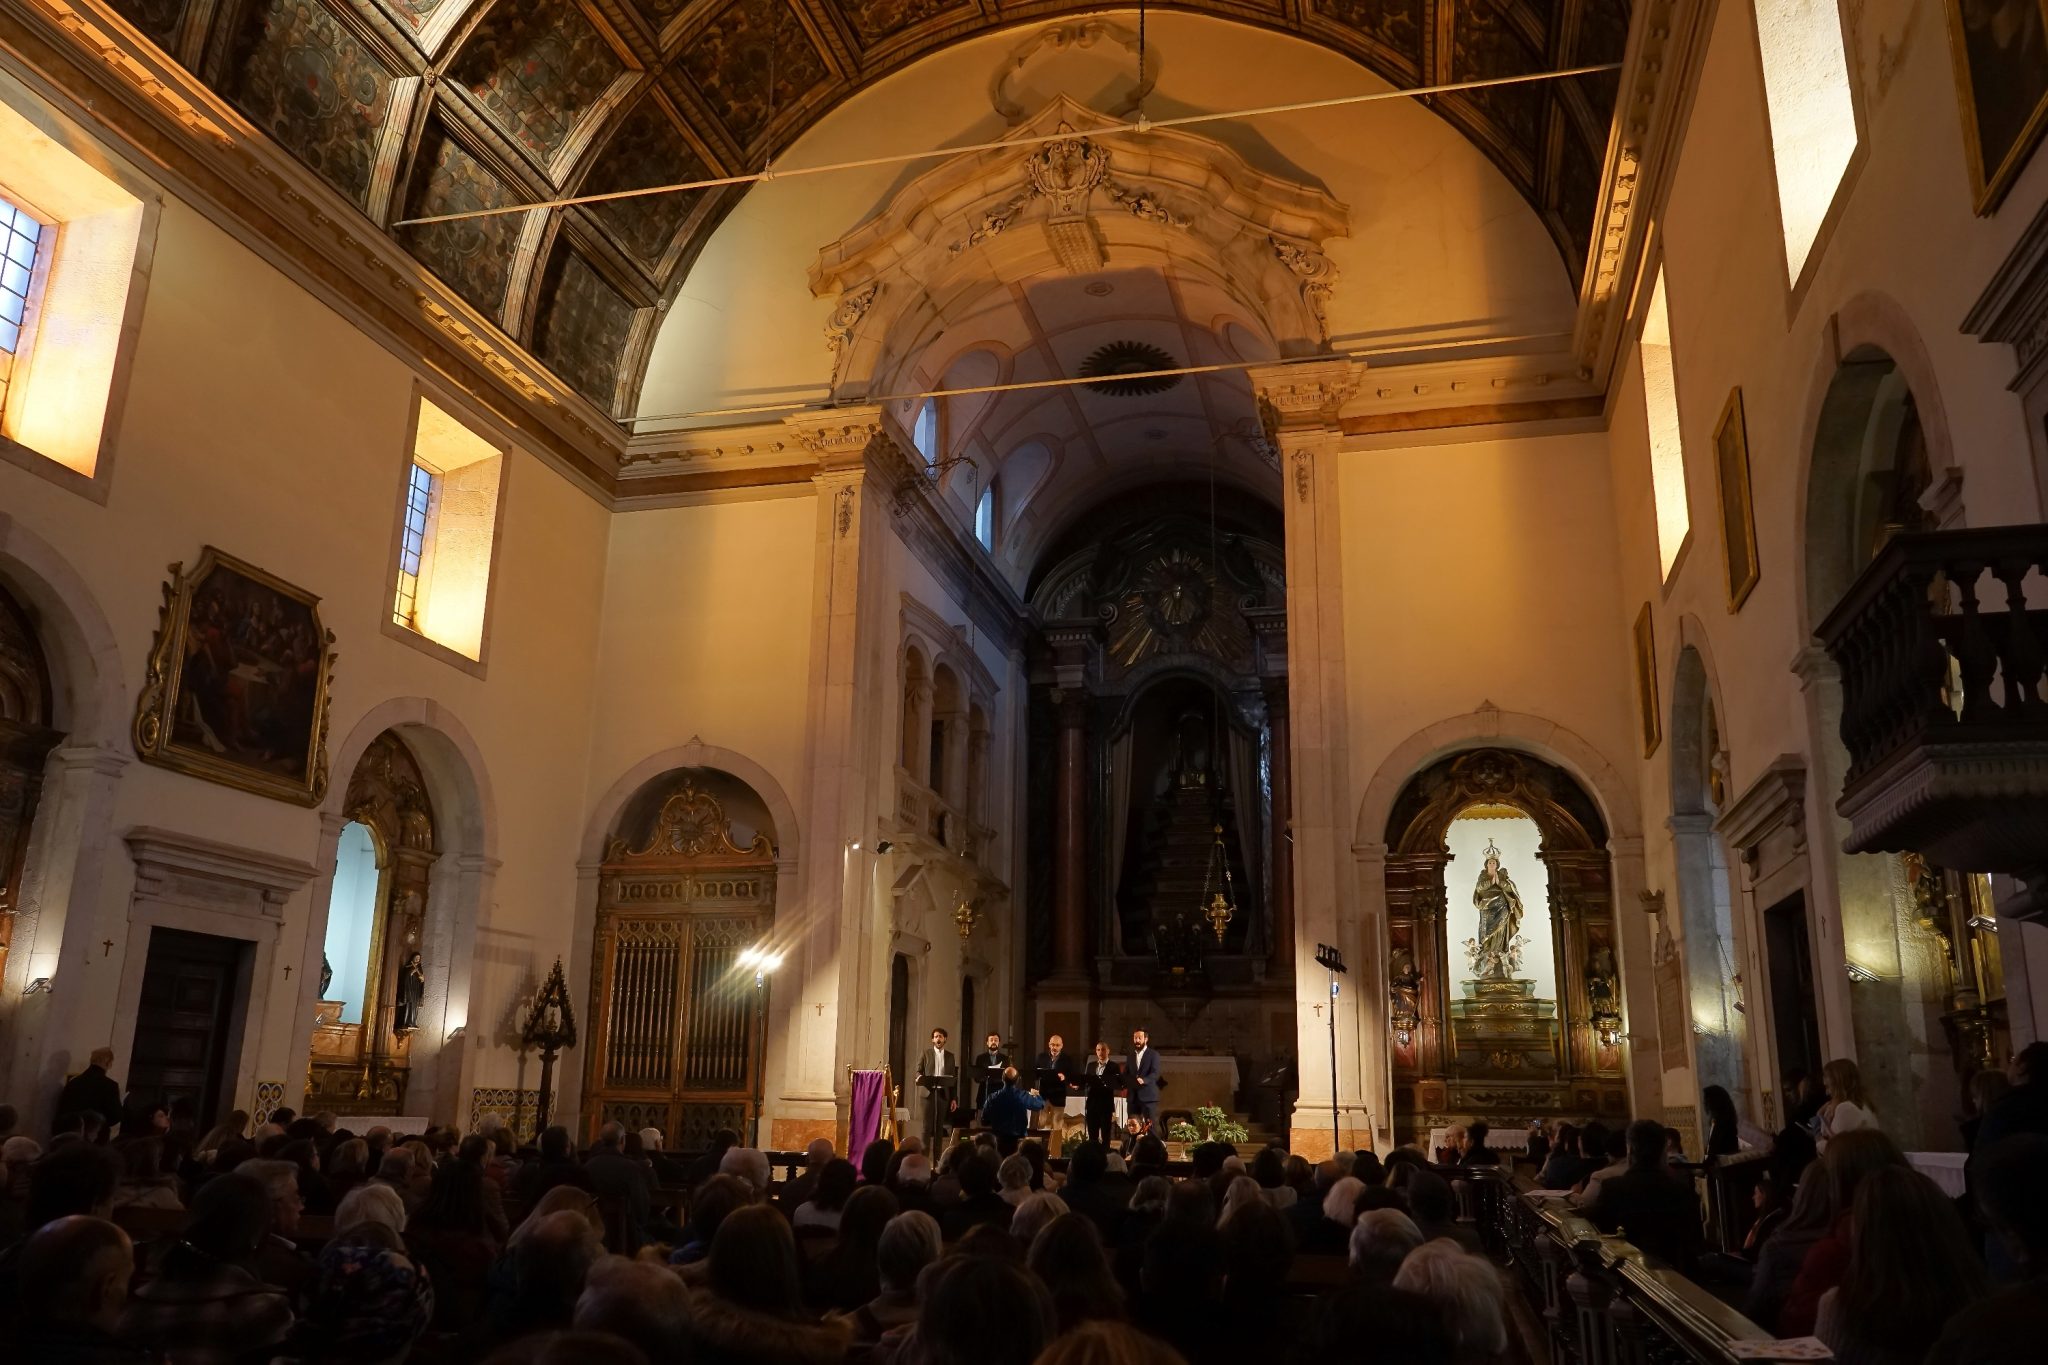 Interior of a church with a choir acting next to the altar and several people seated in front of it. These are with their backs to the observer